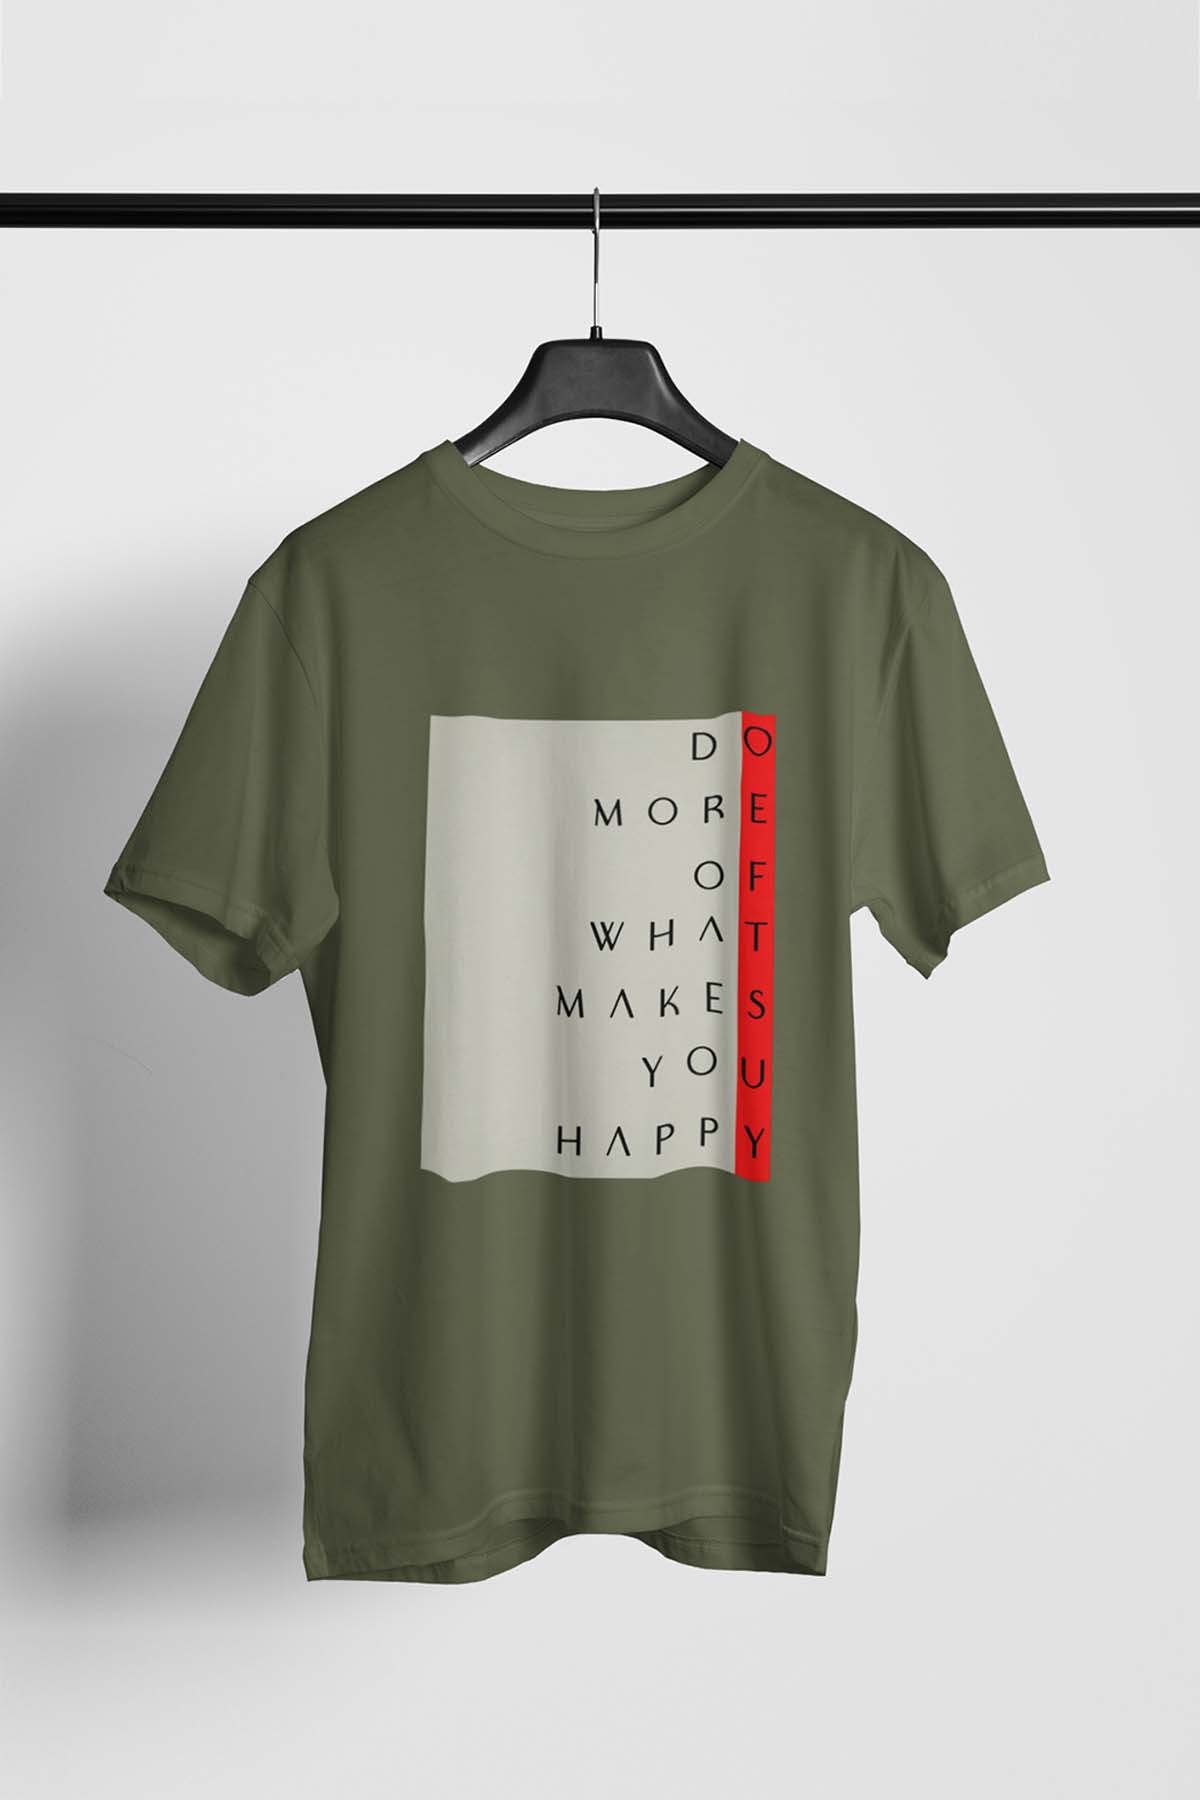 Do More of What Makes You Happy Organic Cotton T-shirt - keos.life